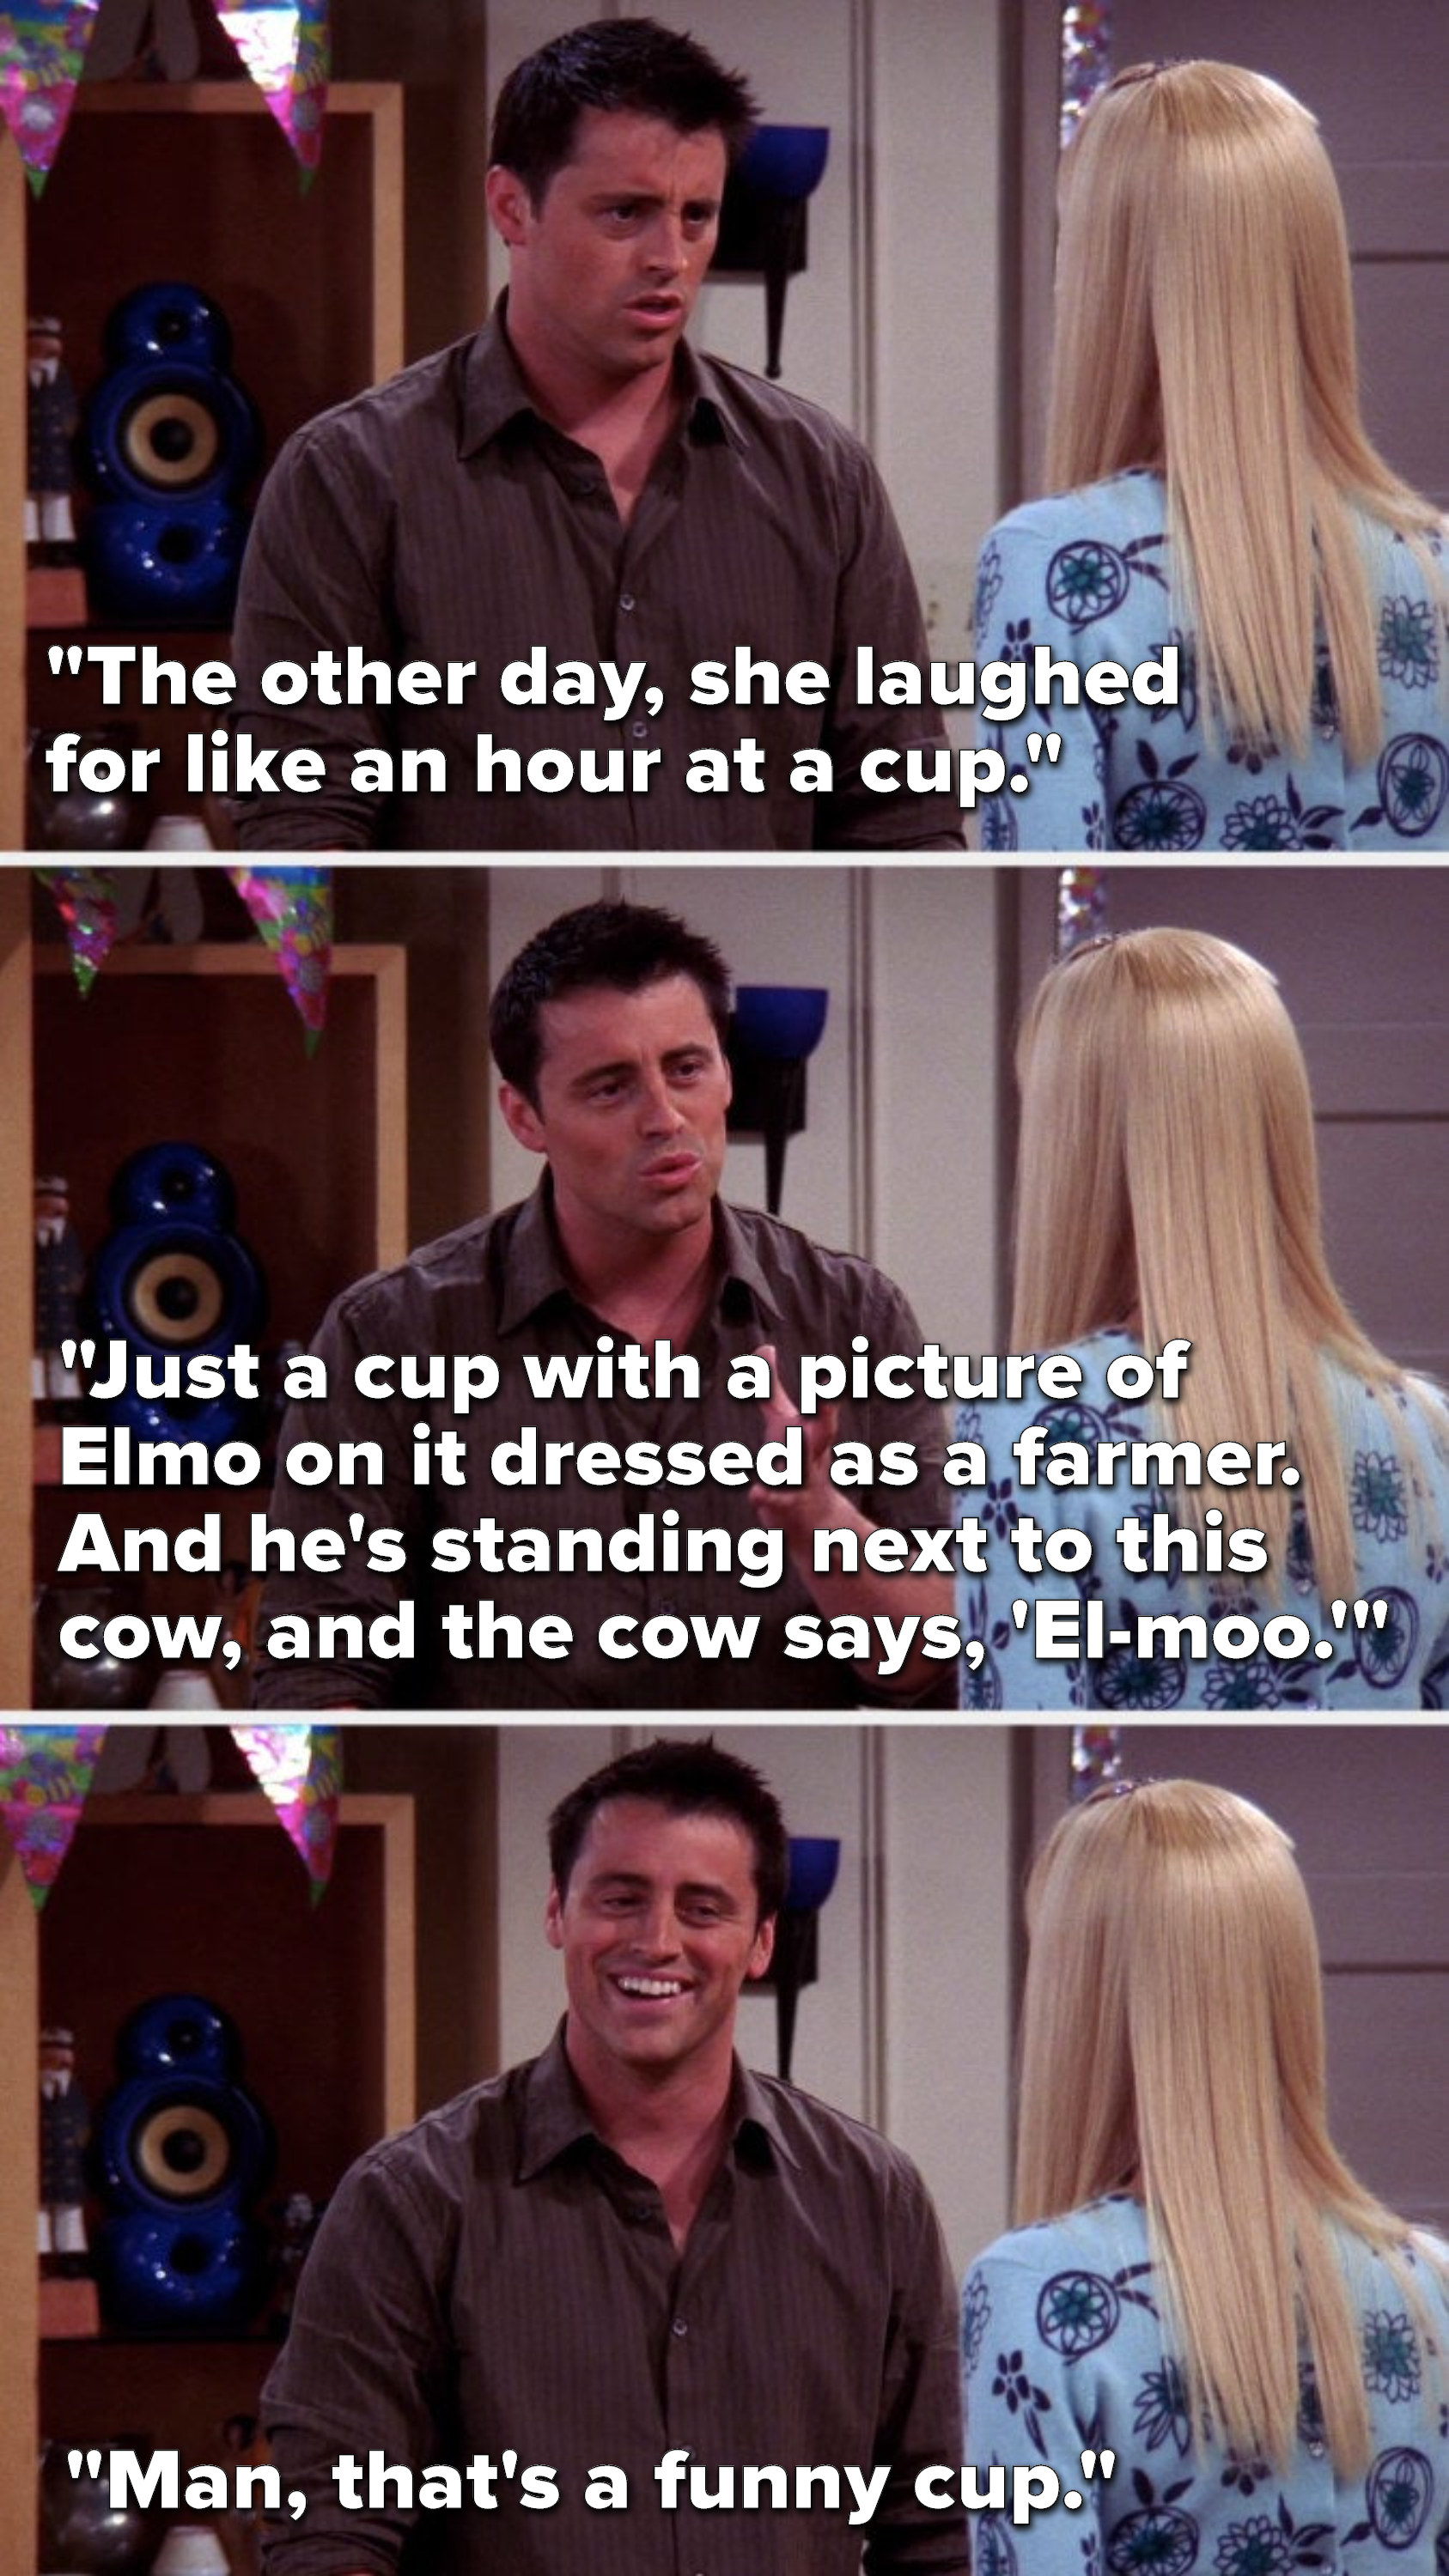 Joey says, &quot;The other day, she laughed for like an hour at a cup, just a cup with a picture of Elmo on it dressed as a farmer, and he&#x27;s standing next to this cow, and the cow says, &#x27;El-moo,&#x27;&quot; then Joey laughs and says, &quot;Man, that&#x27;s a funny cup&quot;